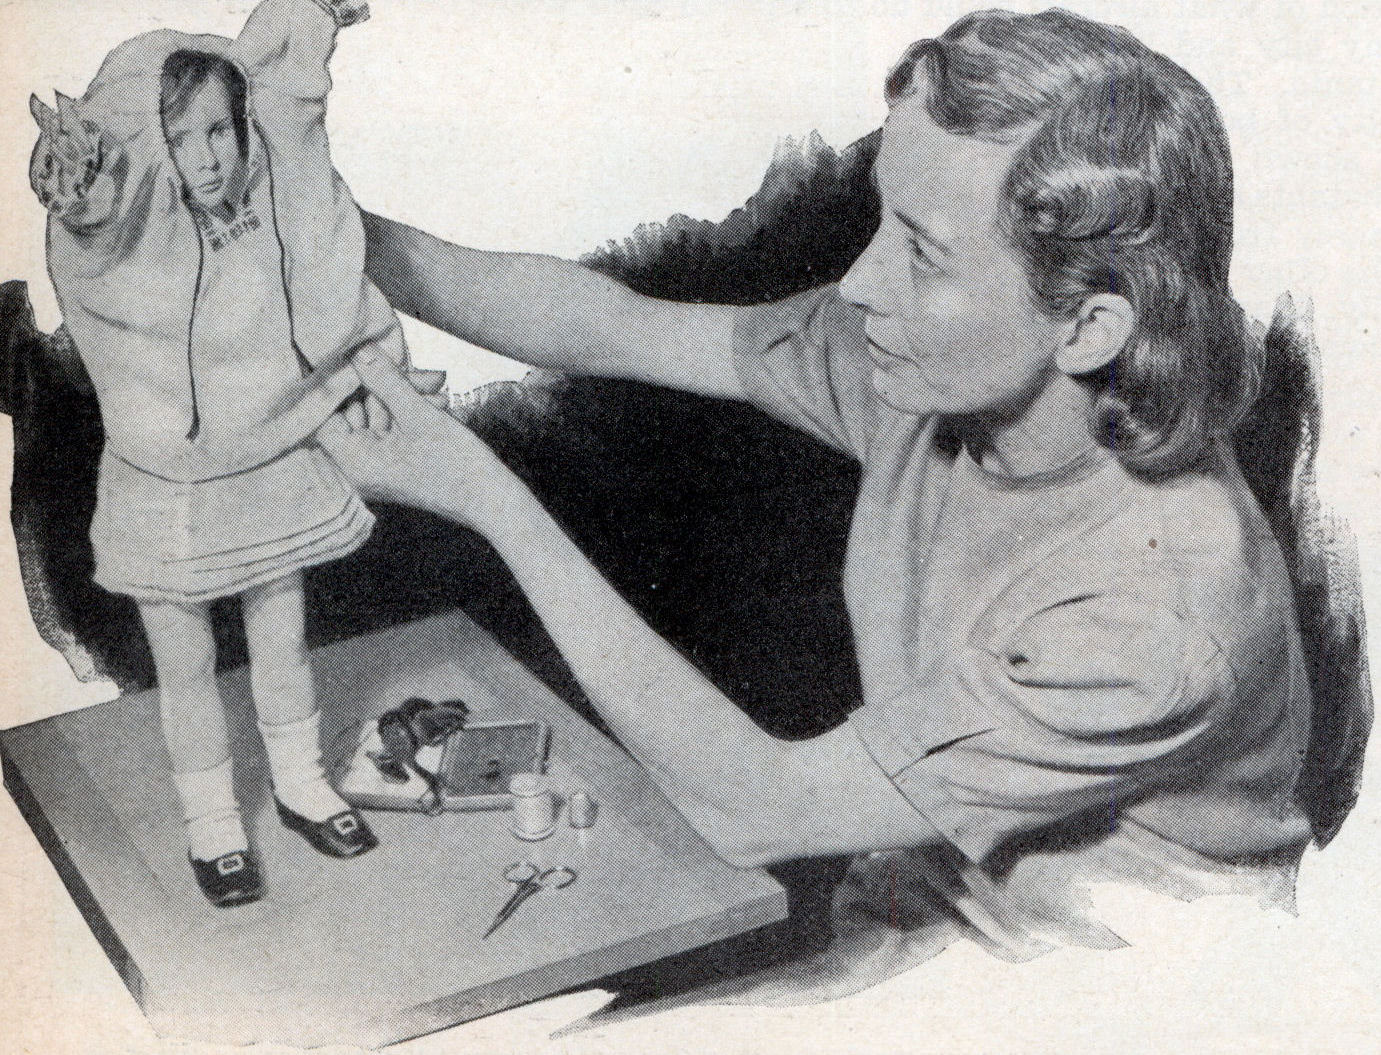 Dressing the doll.